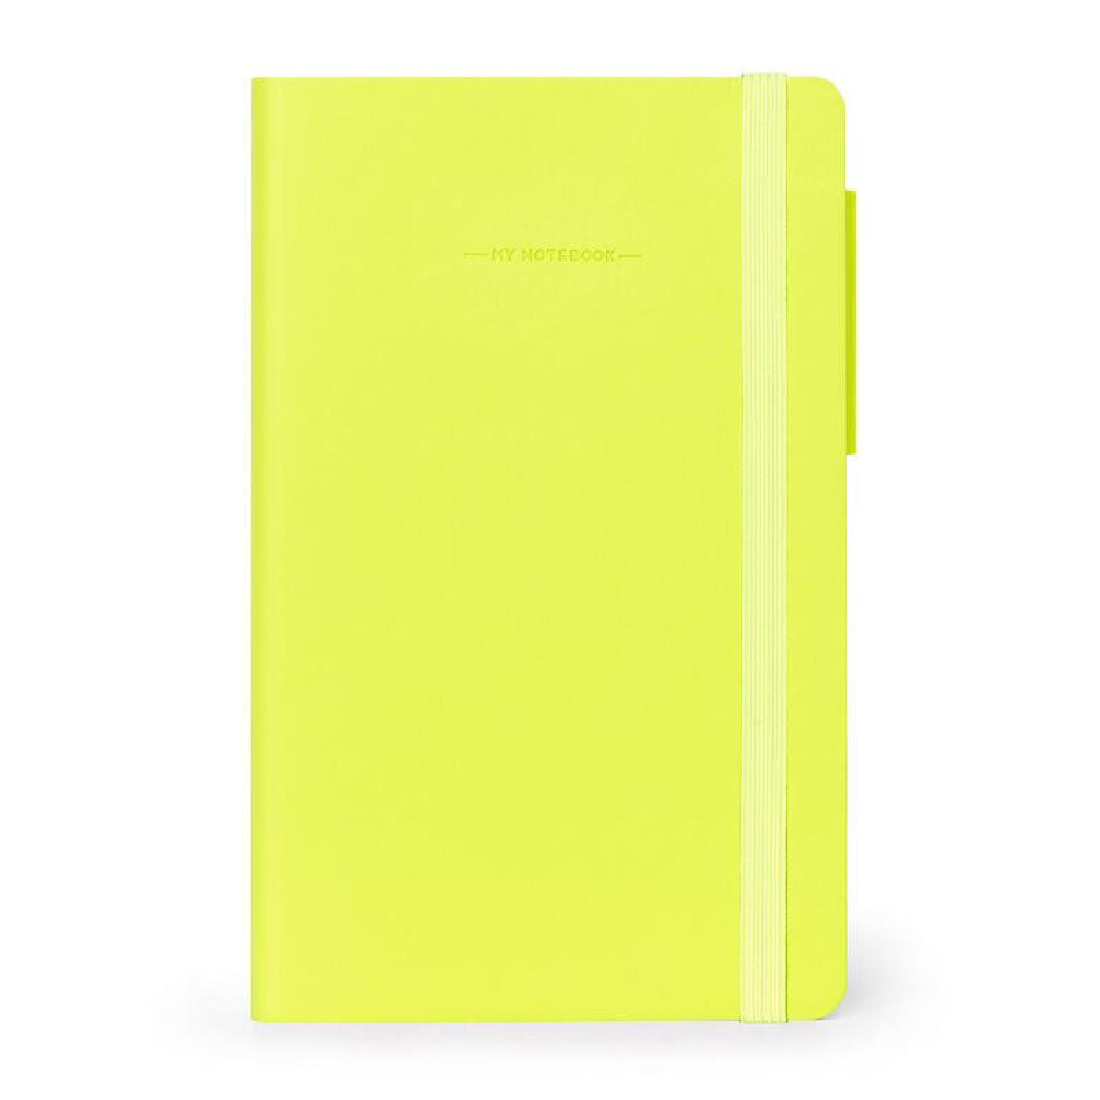 My Notebook - Lined - Medium - Neon Lime Green Cover LEGAMI